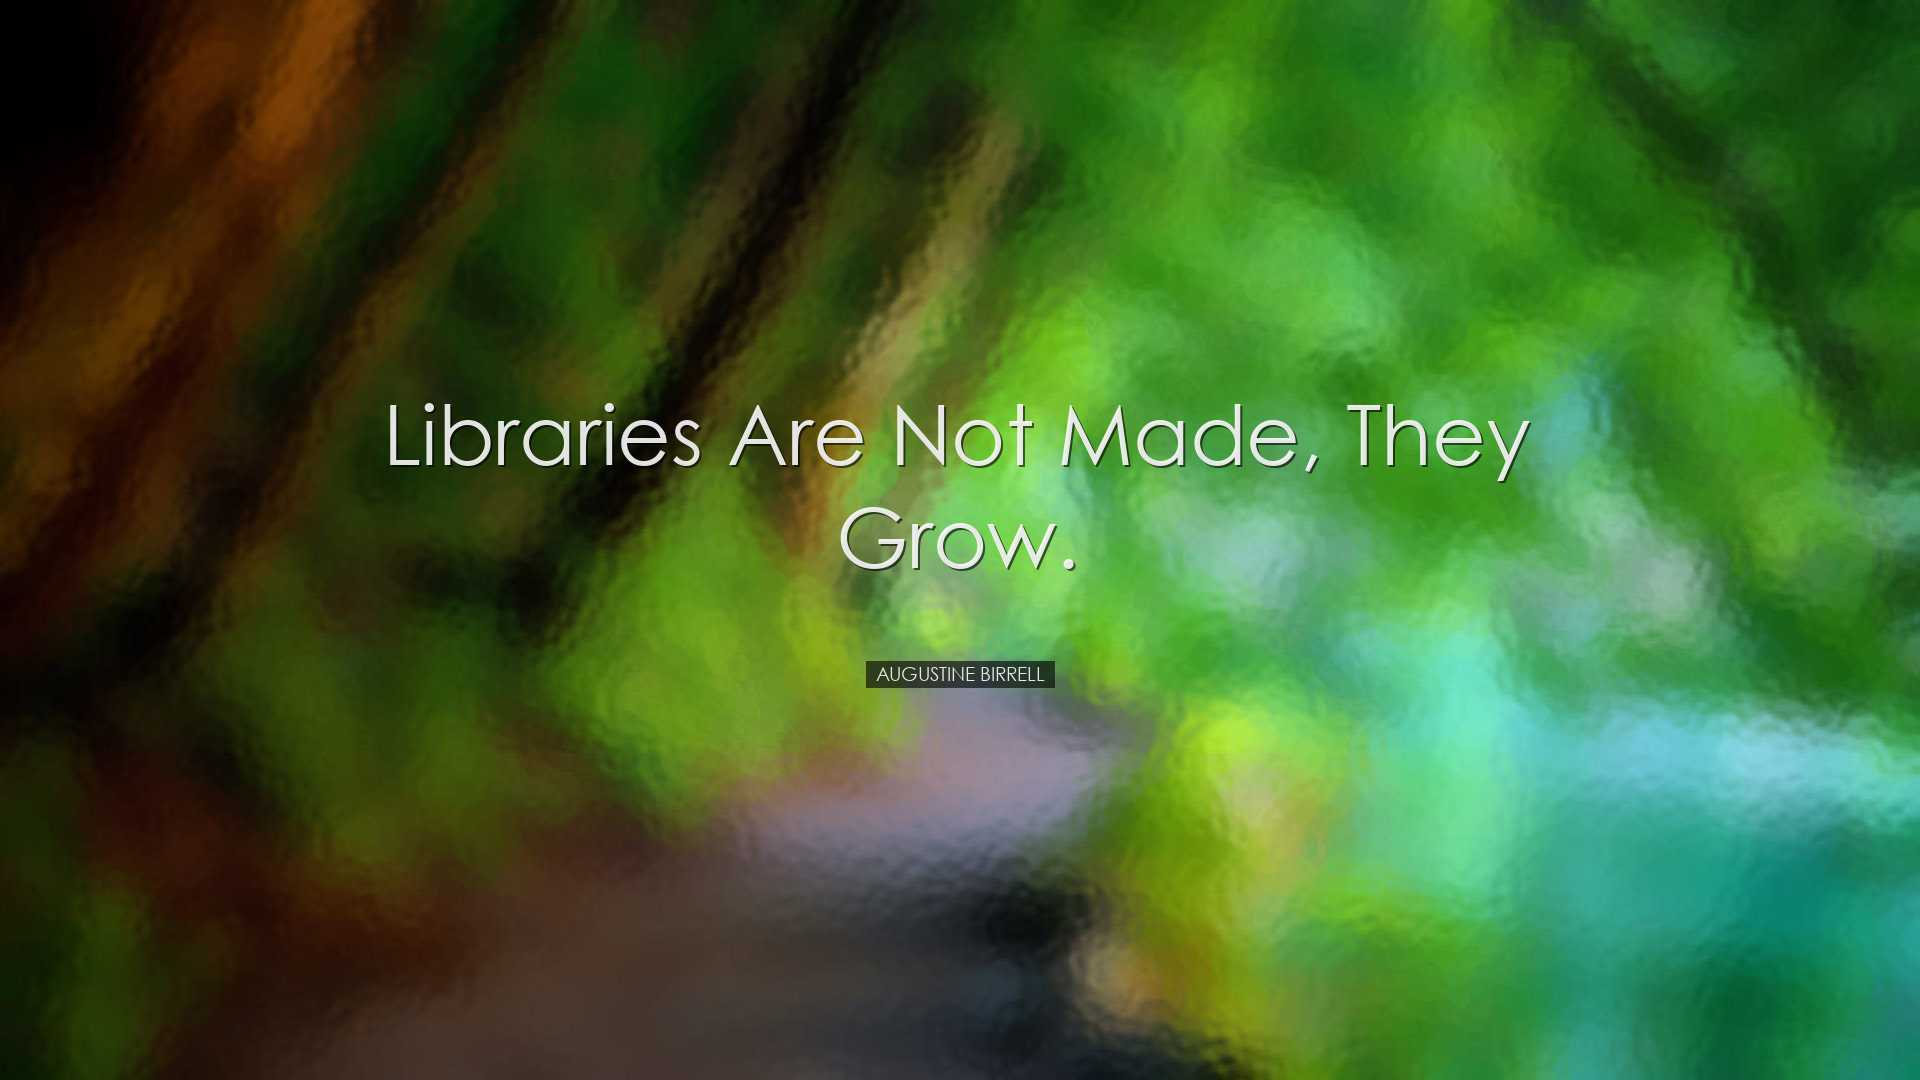 Libraries are not made, they grow. - Augustine Birrell